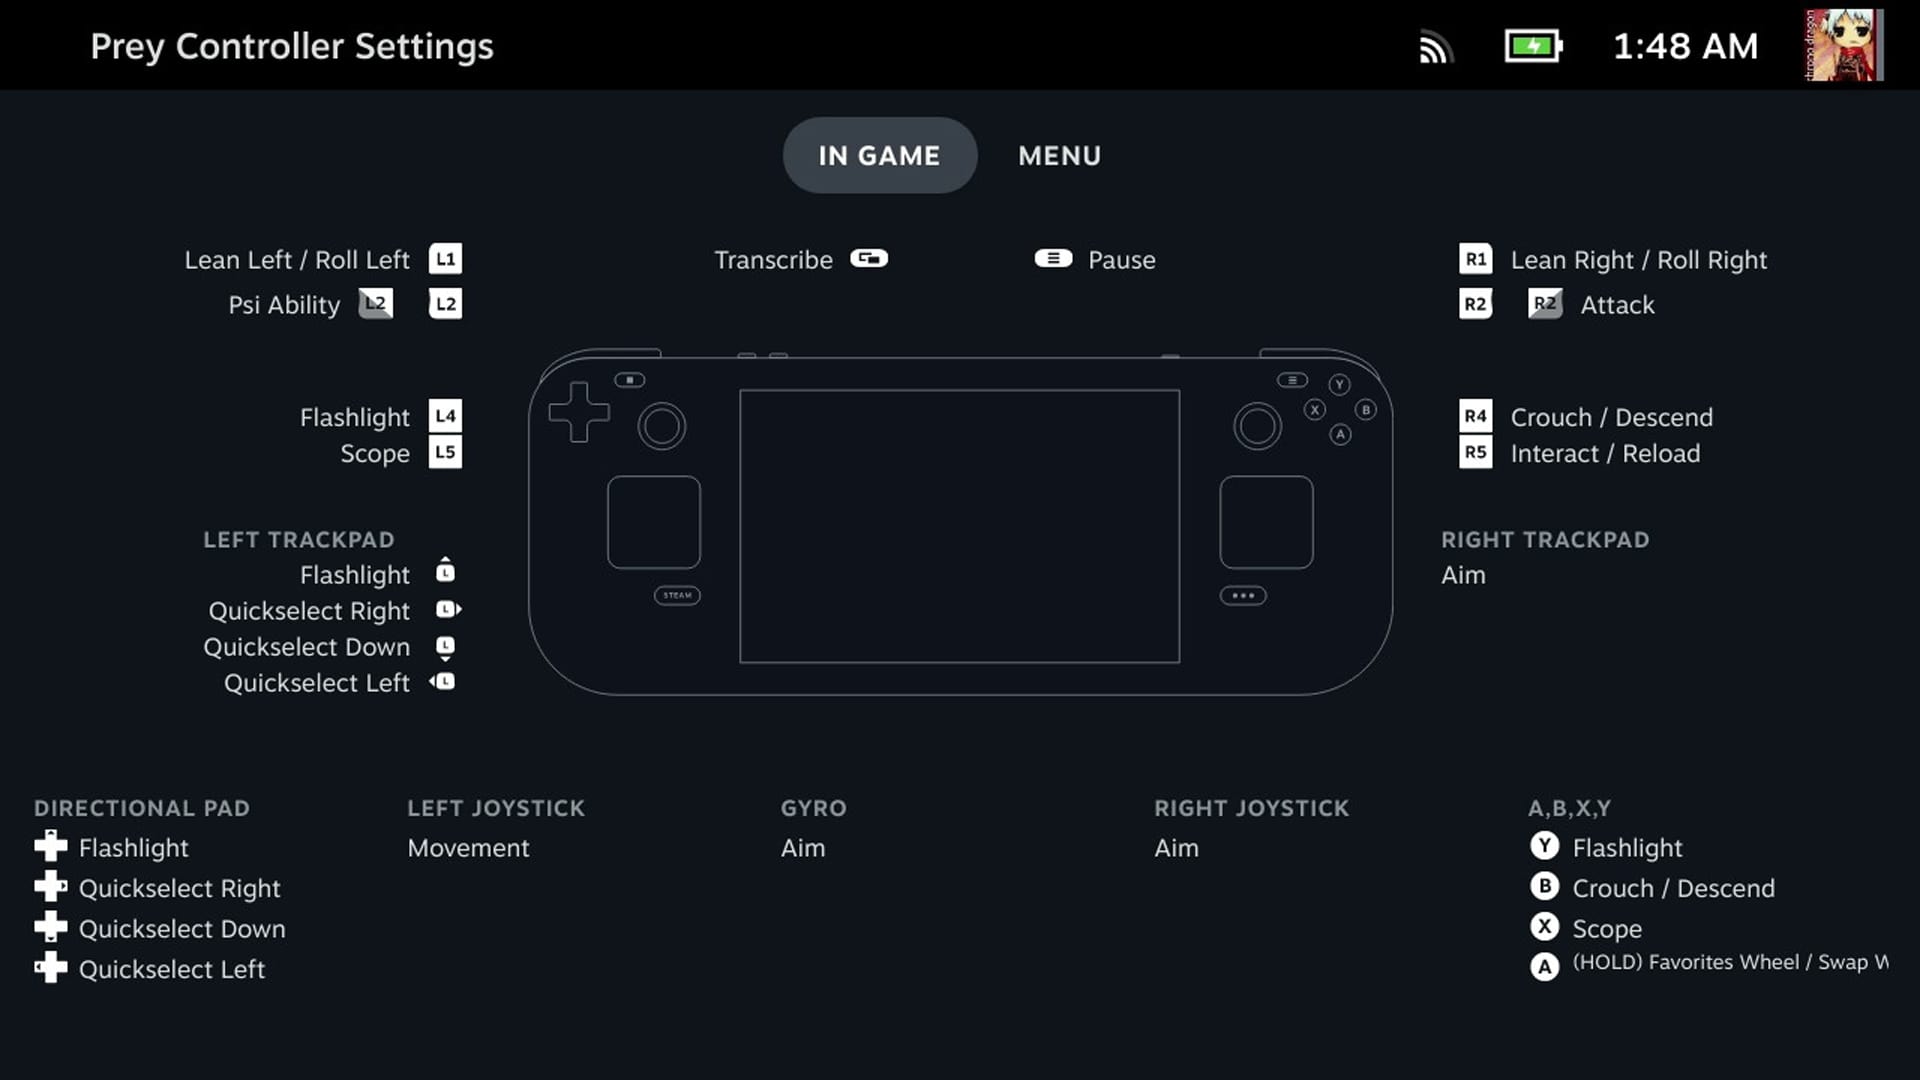 Display of the Steam Deck's customizable control settings and user interface